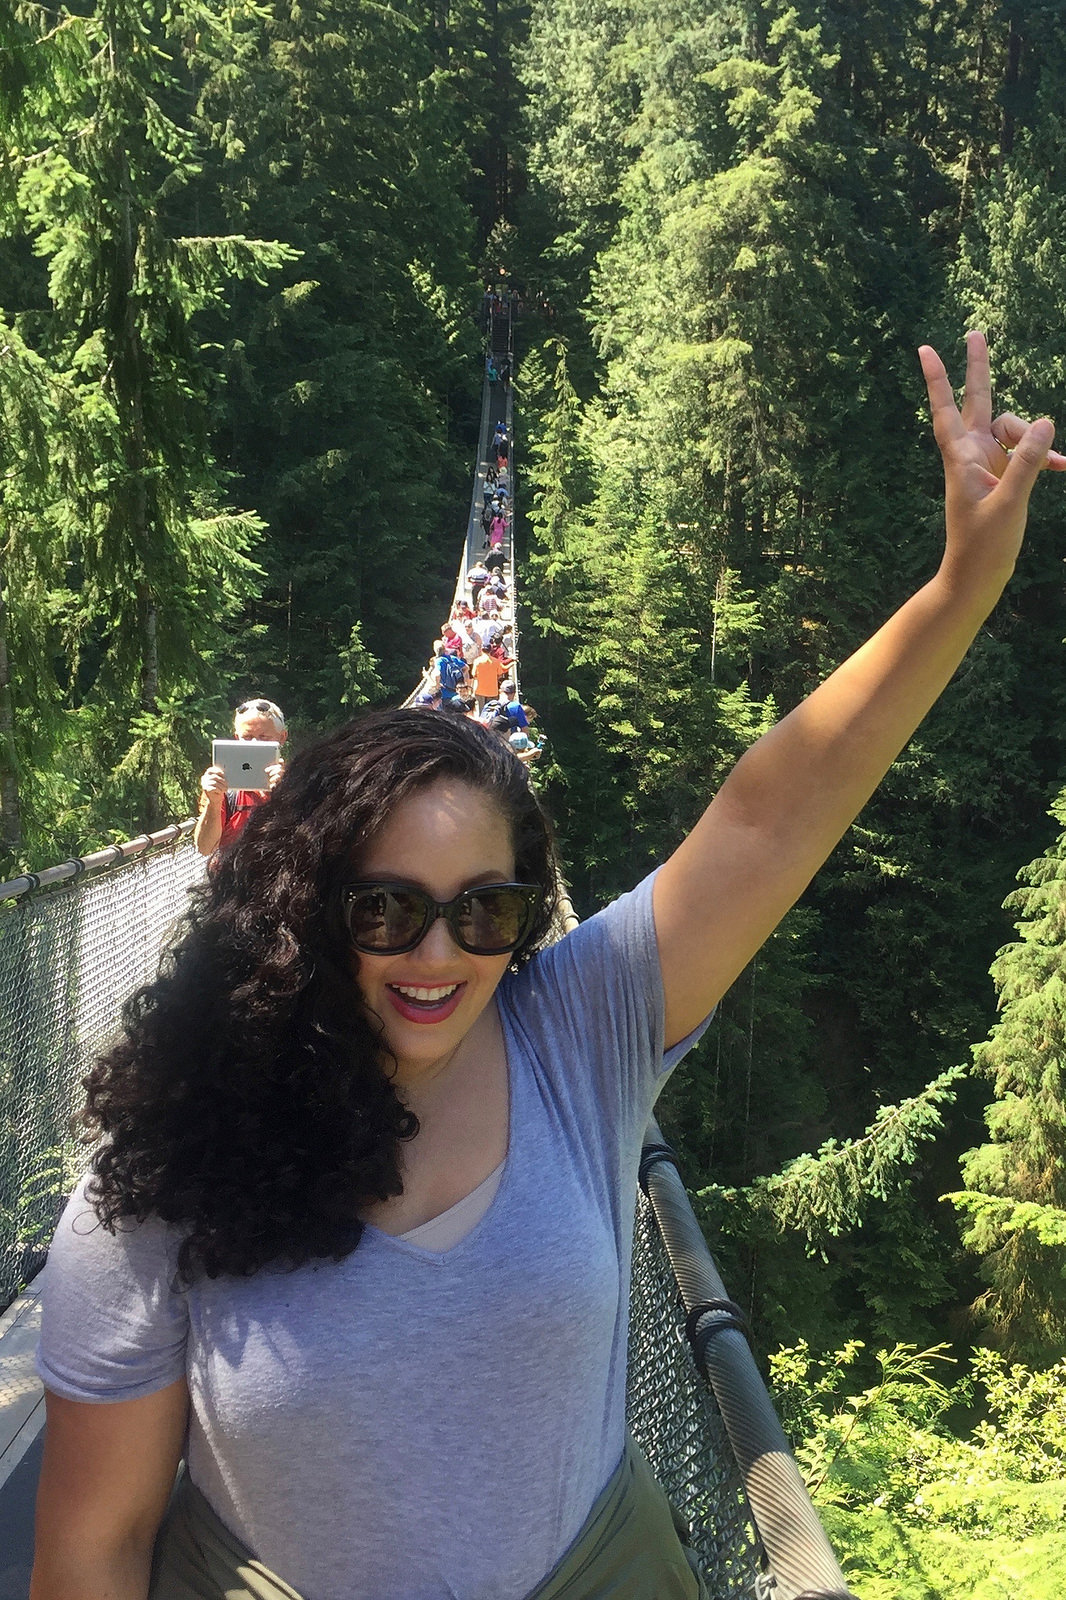 Tanesha Awasthi (formerly known as Girl with Curves) at the Capilano Suspension Bridge in Vancouver.